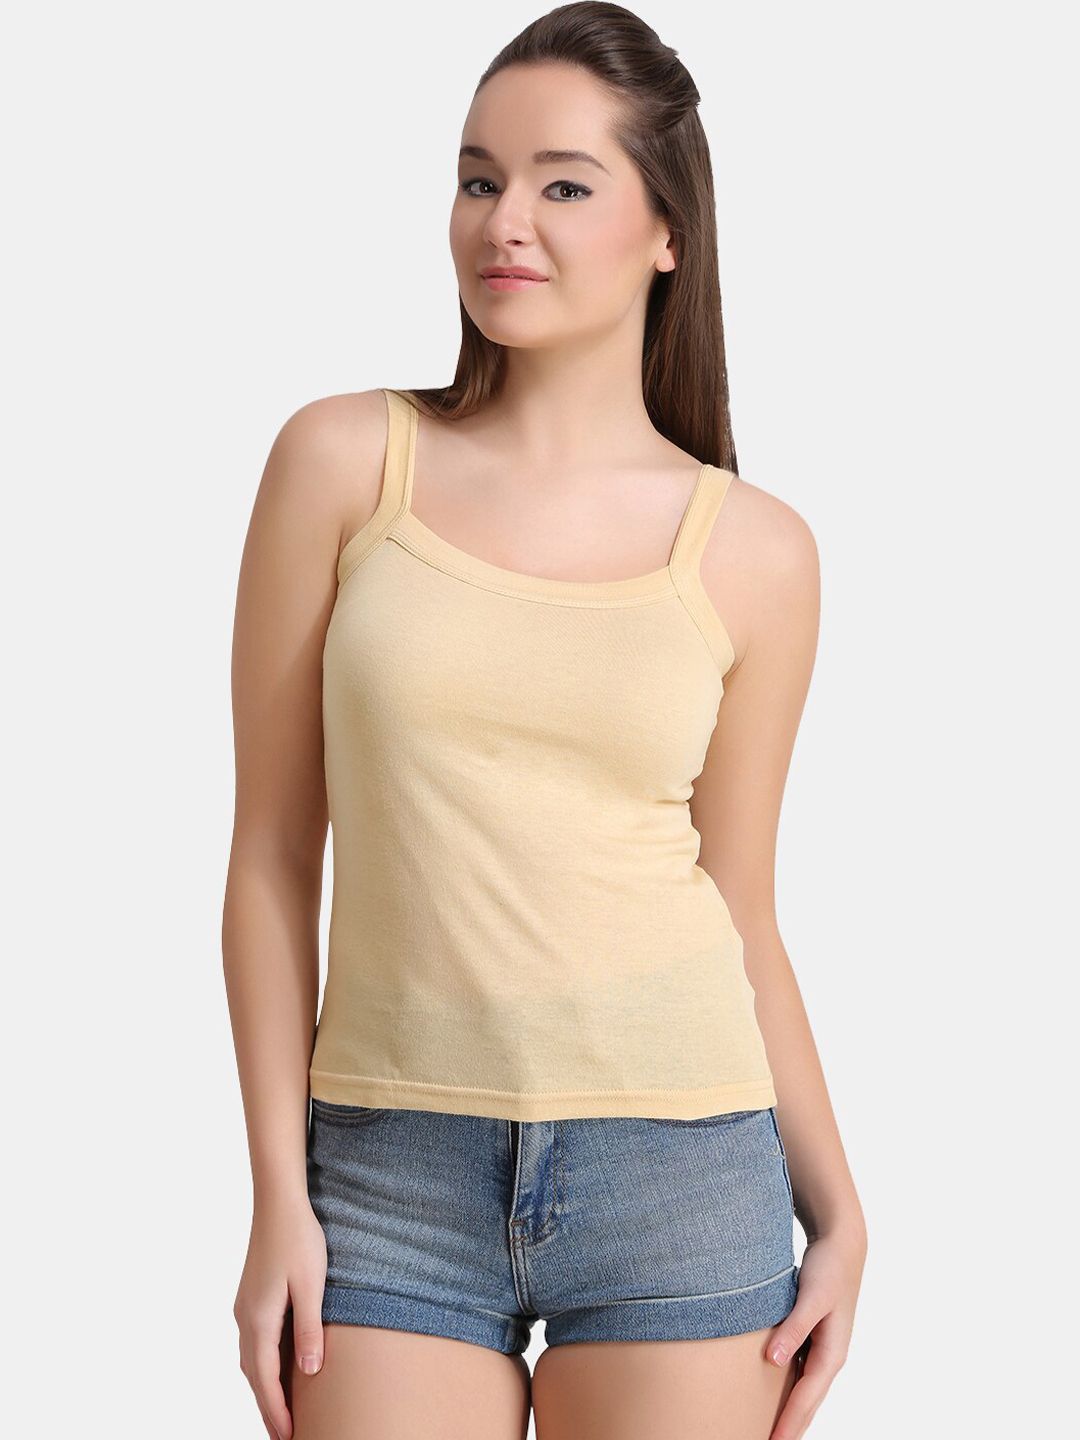 Buy DressBerry DressBerry Non Padded Pure Cotton Camisole at Redfynd